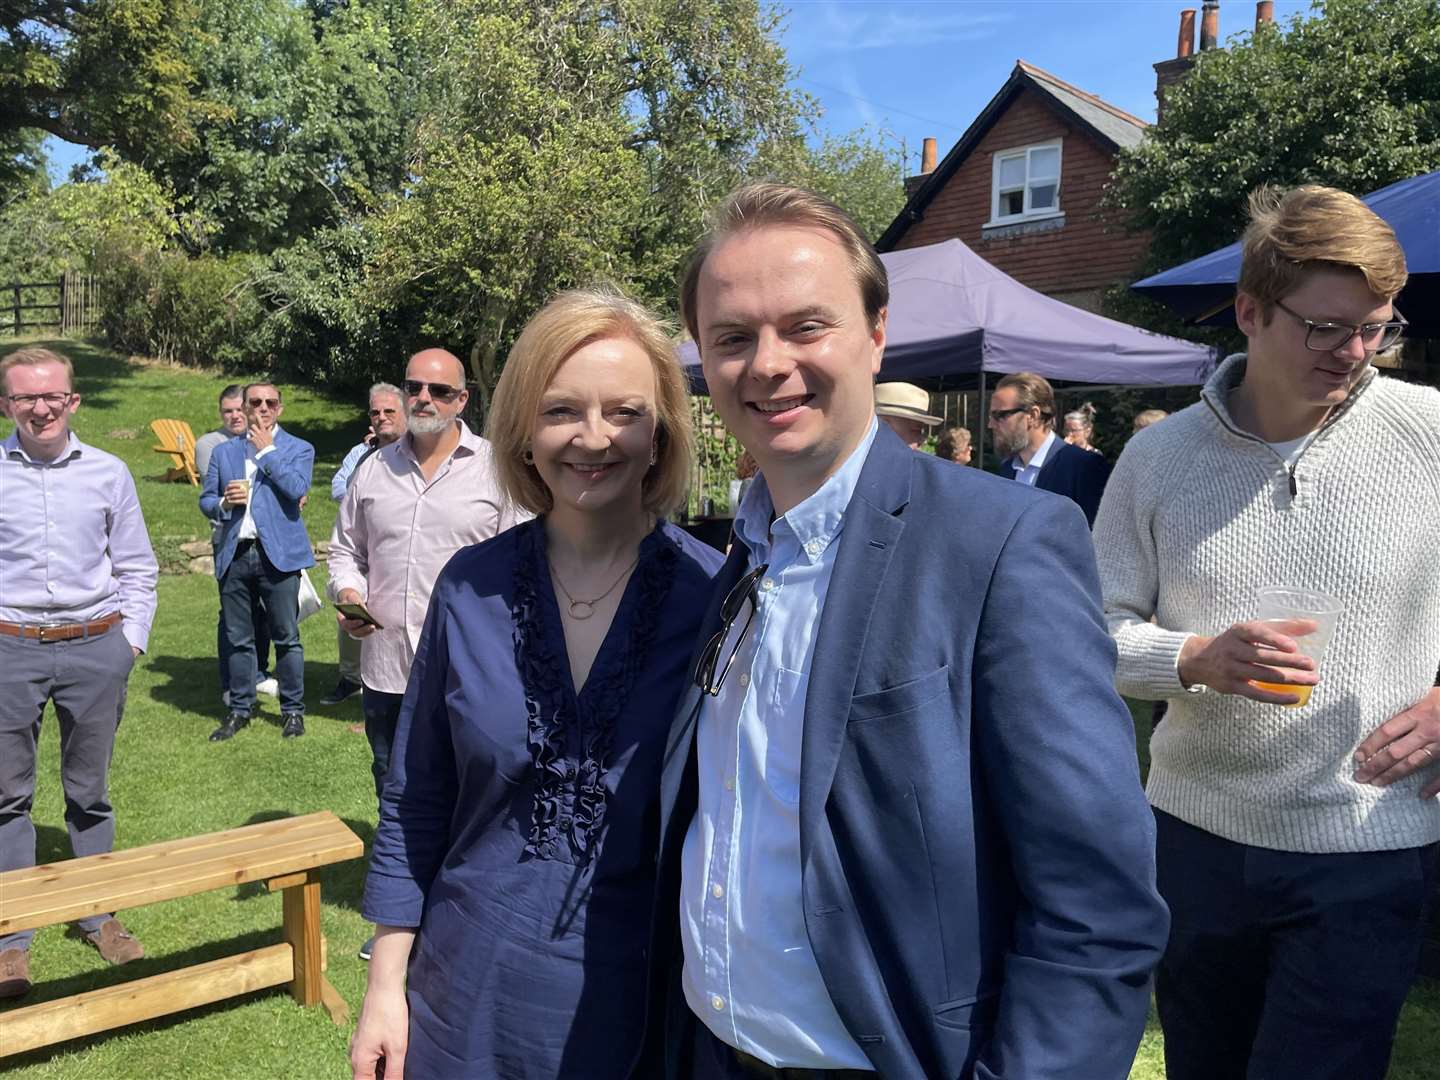 'Don't they look similar' said one KentOnline commenter –Liz Truss with reporter Alex Jee